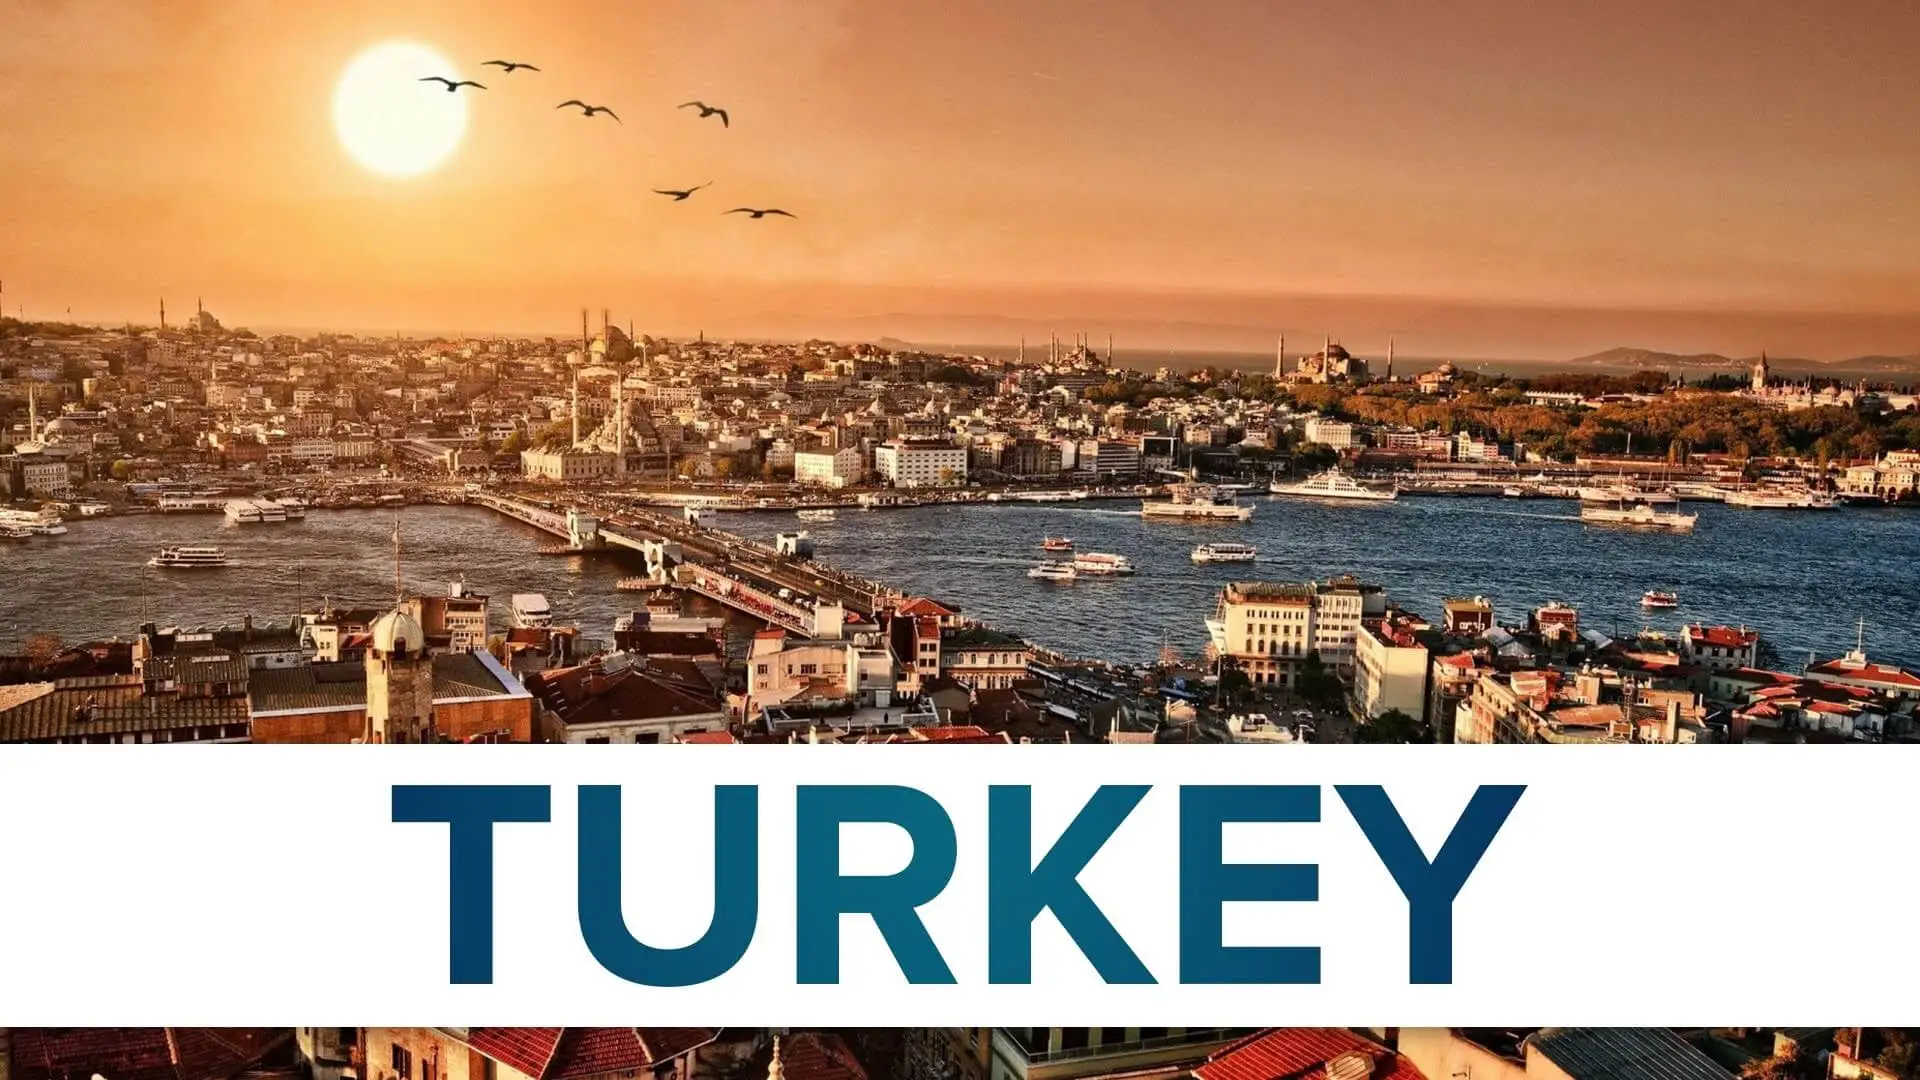 14 Amazing Facts About Turkey and Turkish People